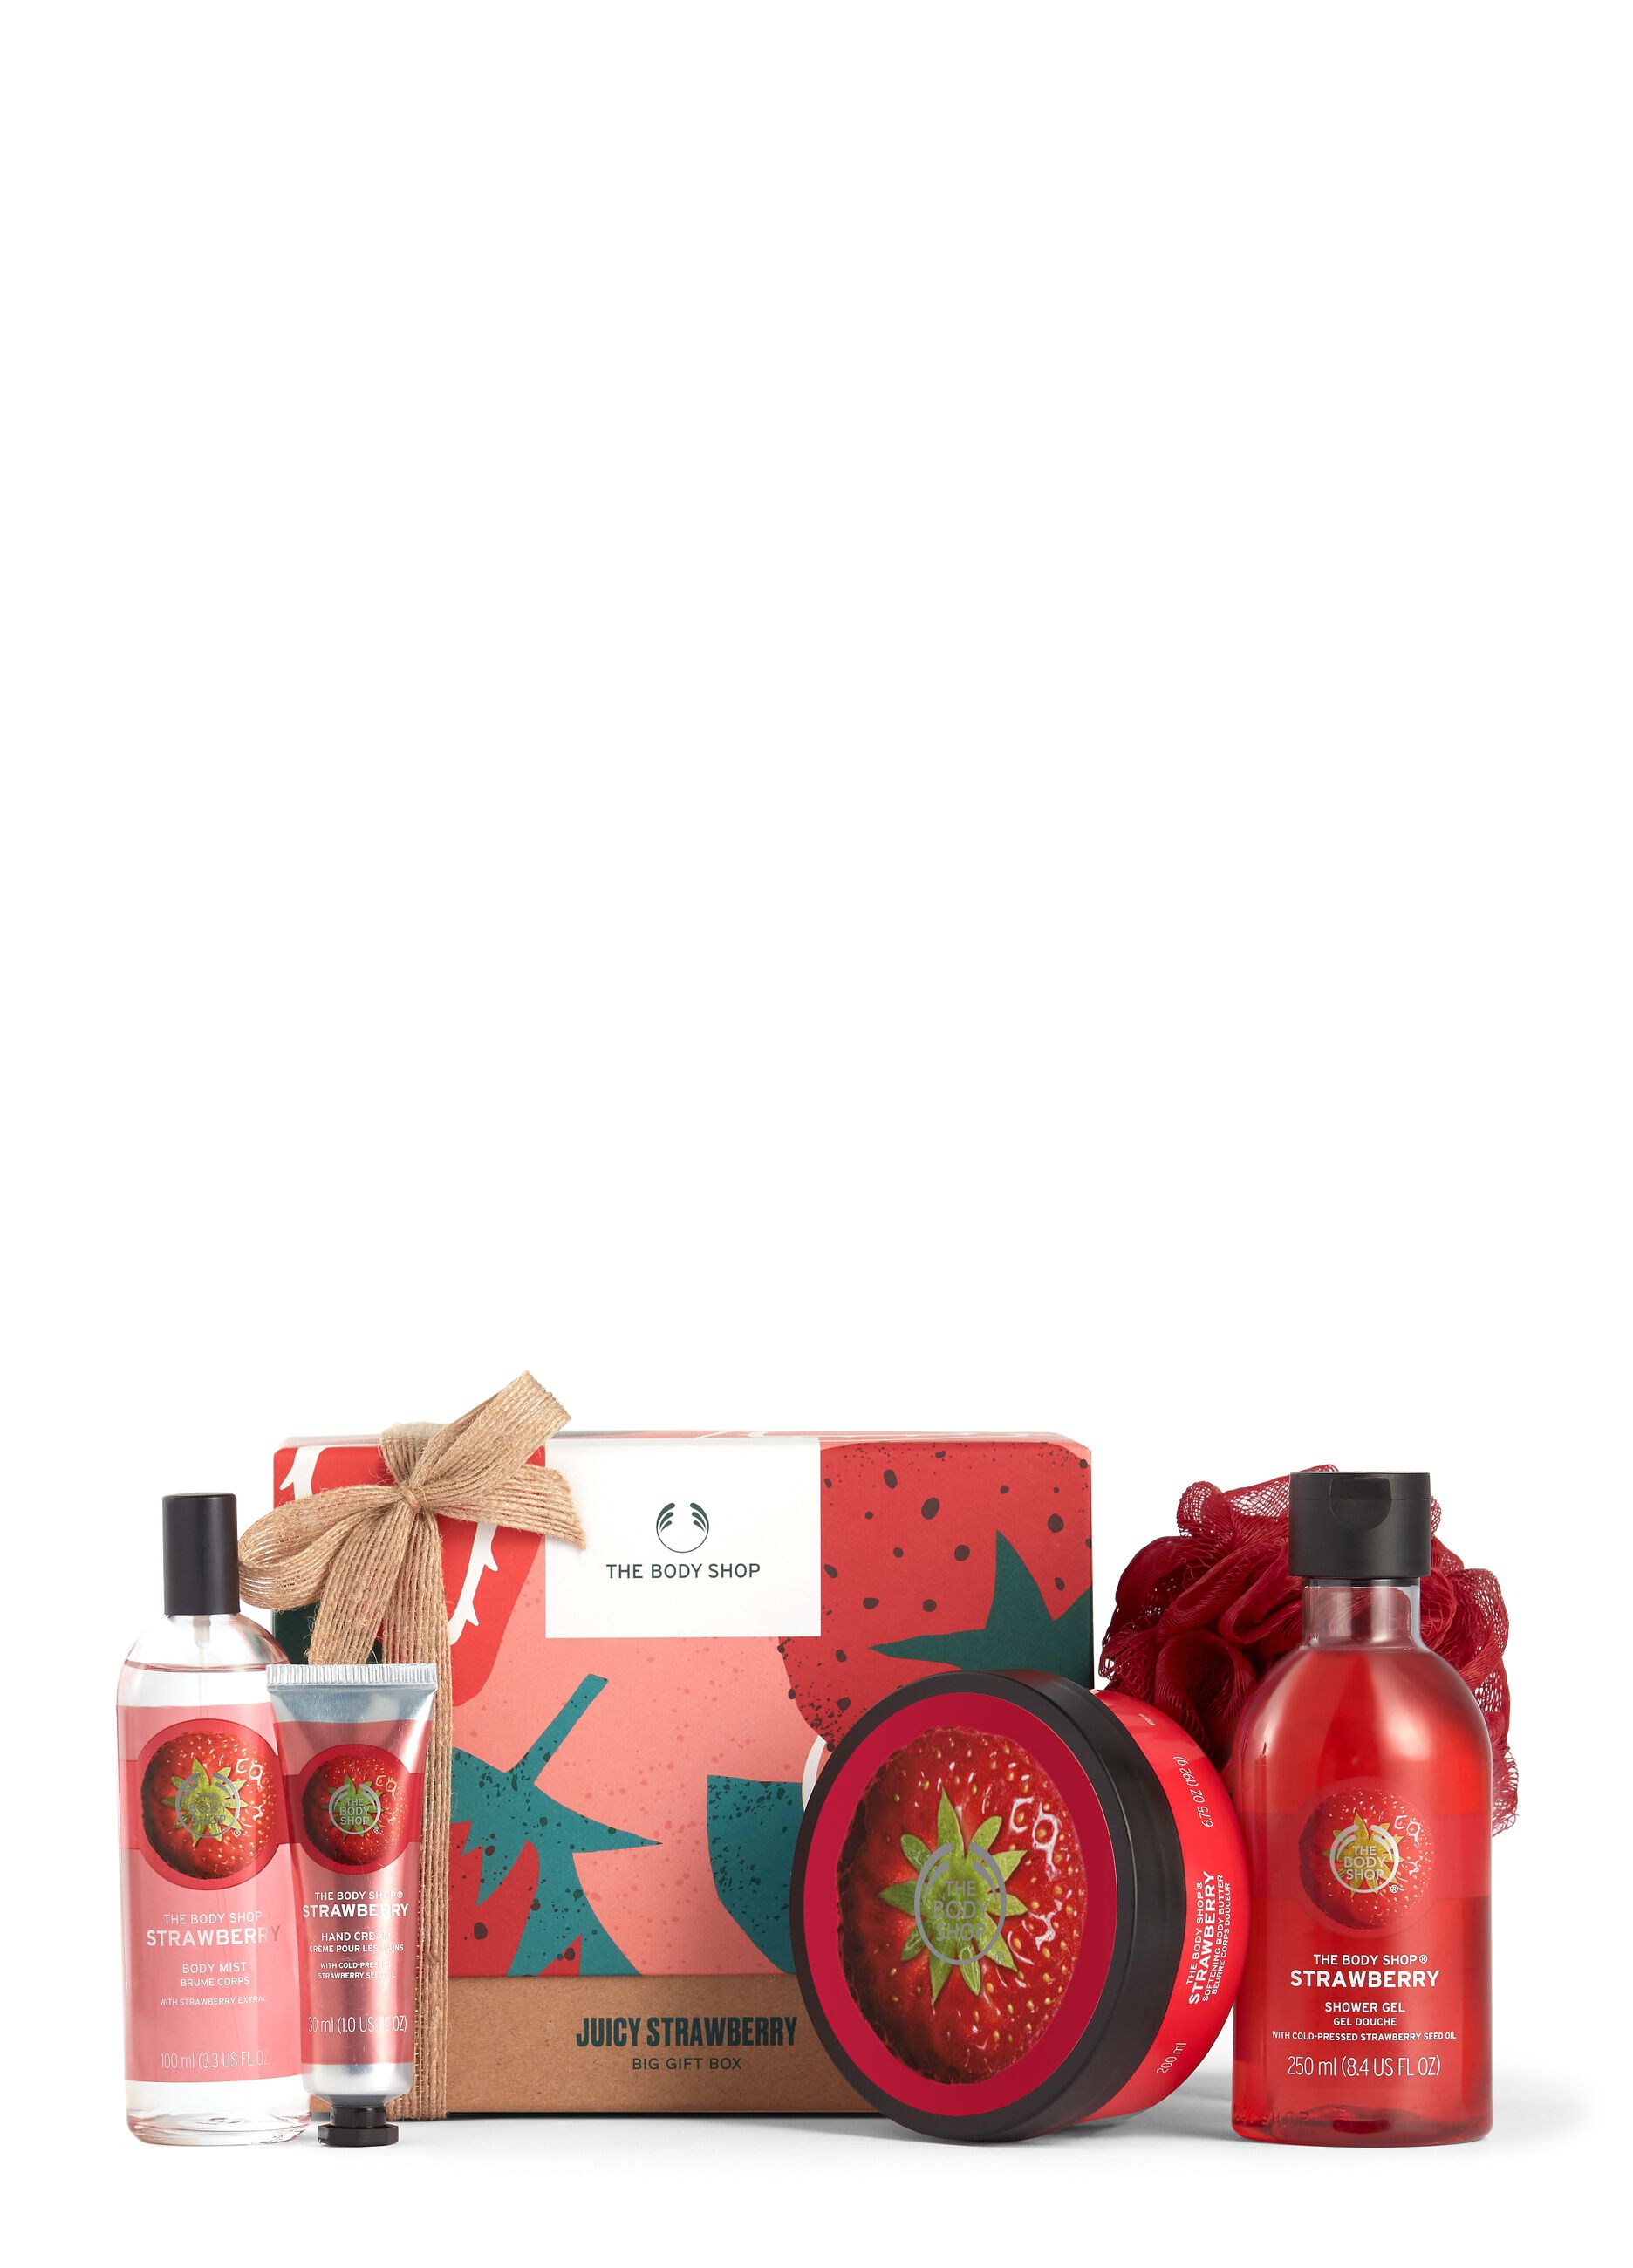 The Body Shop large strawberry gift box